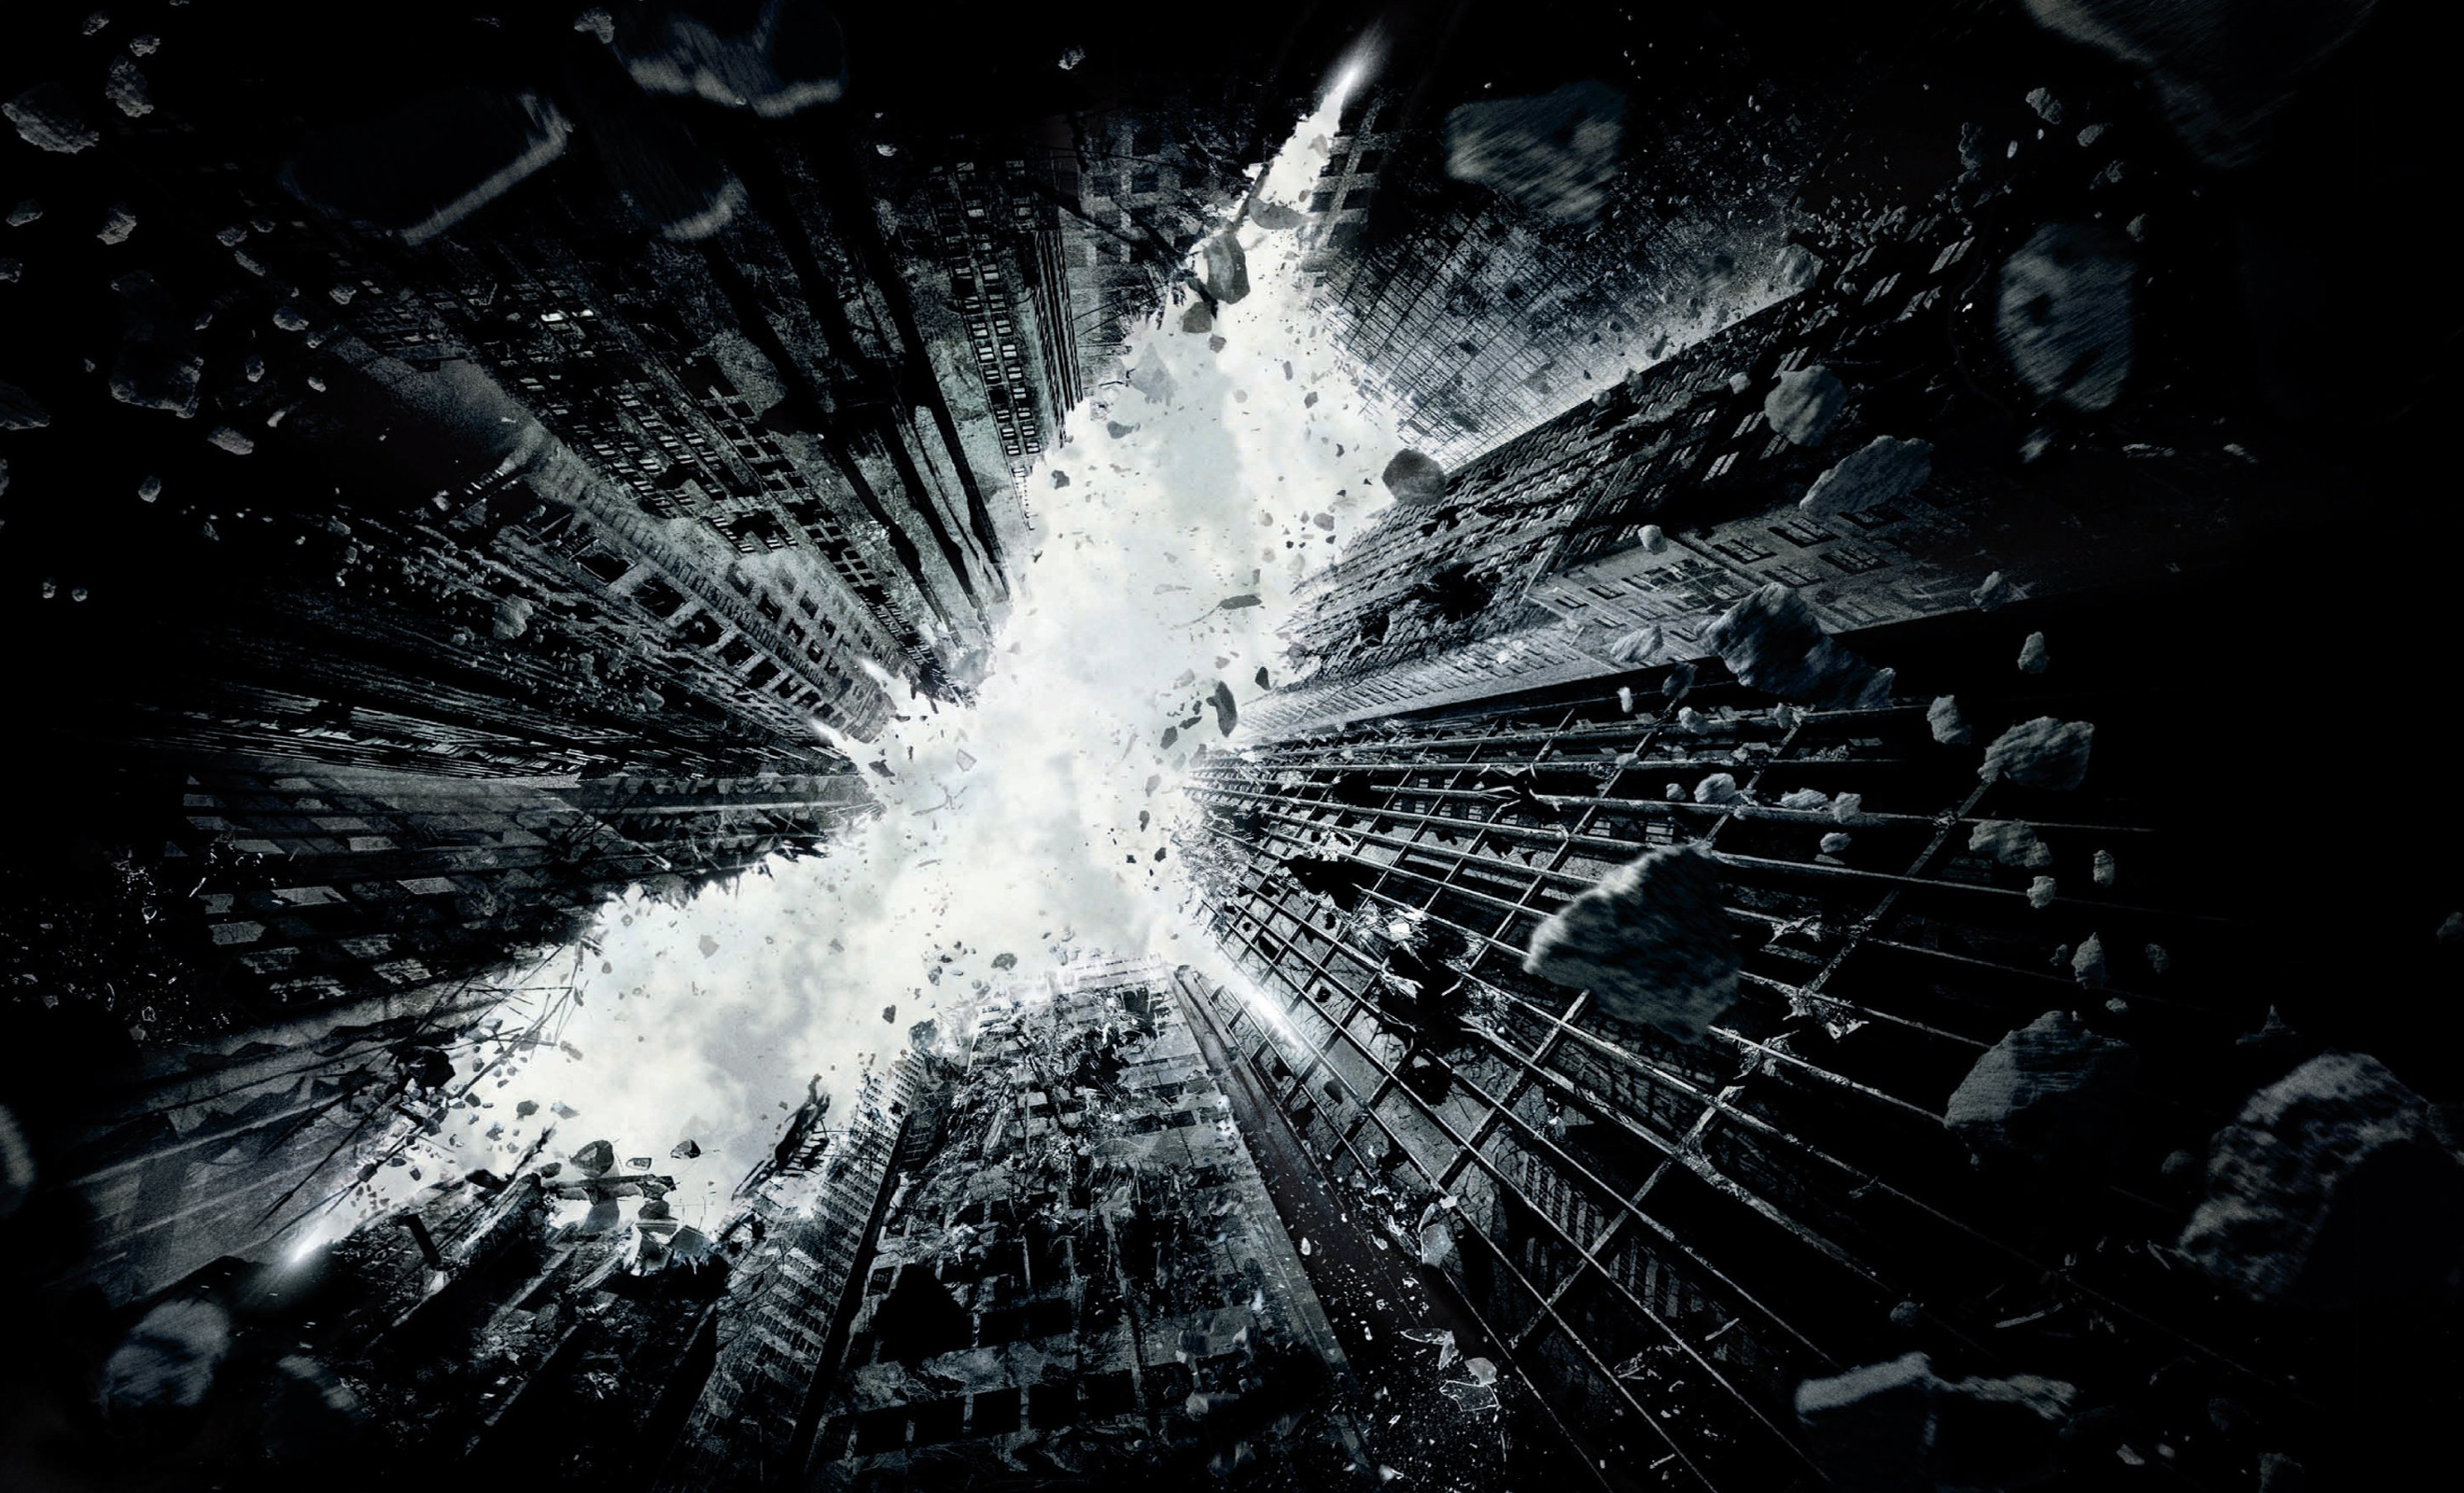 Free download Pics Photos The Dark Knight Hd Wallpaper [2640x1600] for